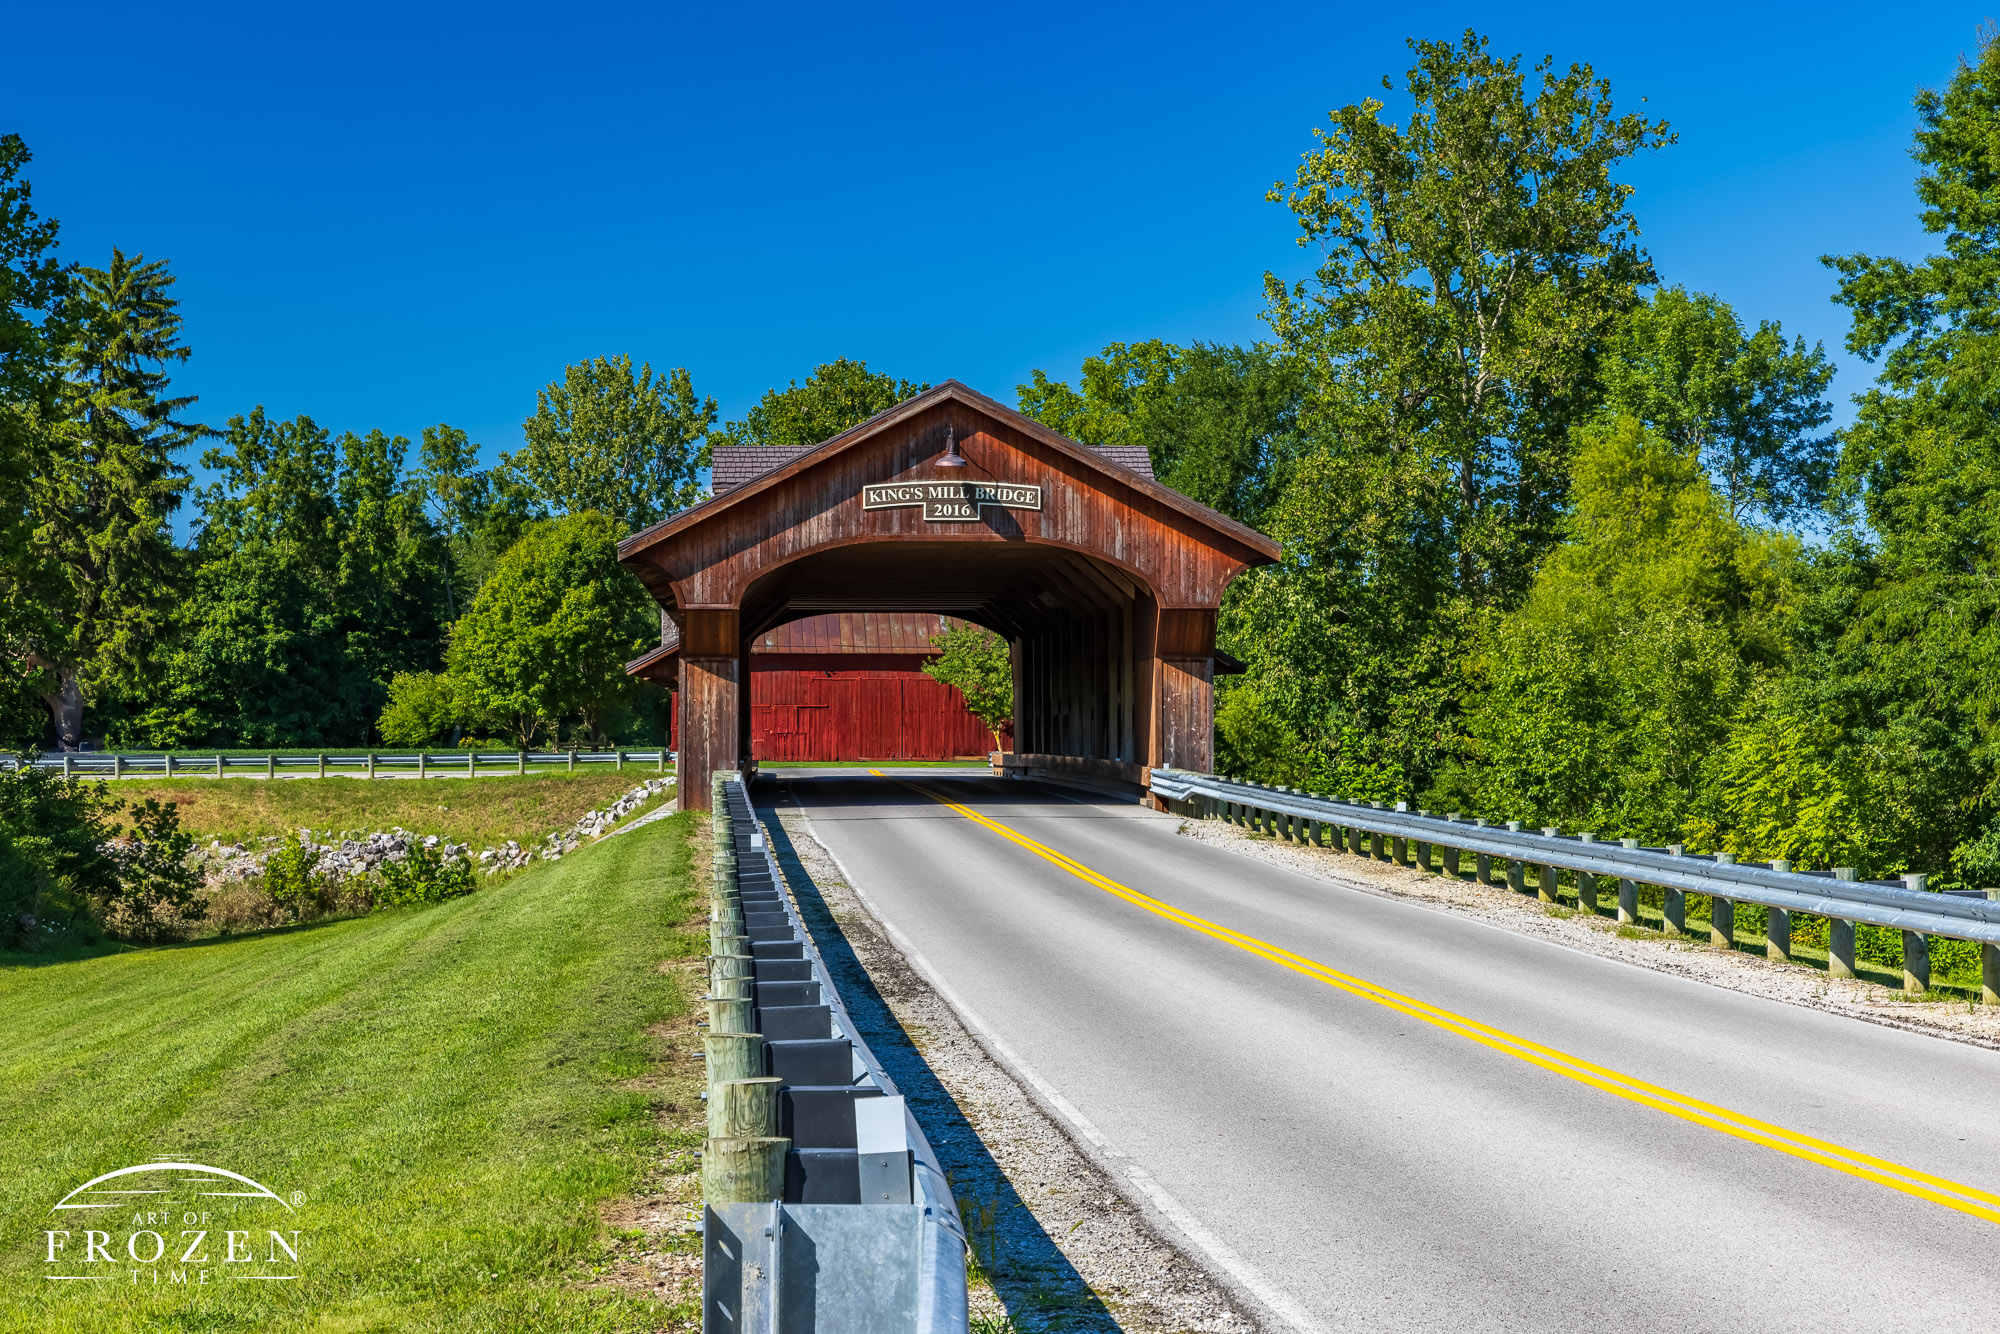 King’s Mill Covered Bridge in Marion County Ohio offers travelers nostalgic experience as they cross the Olentangy River